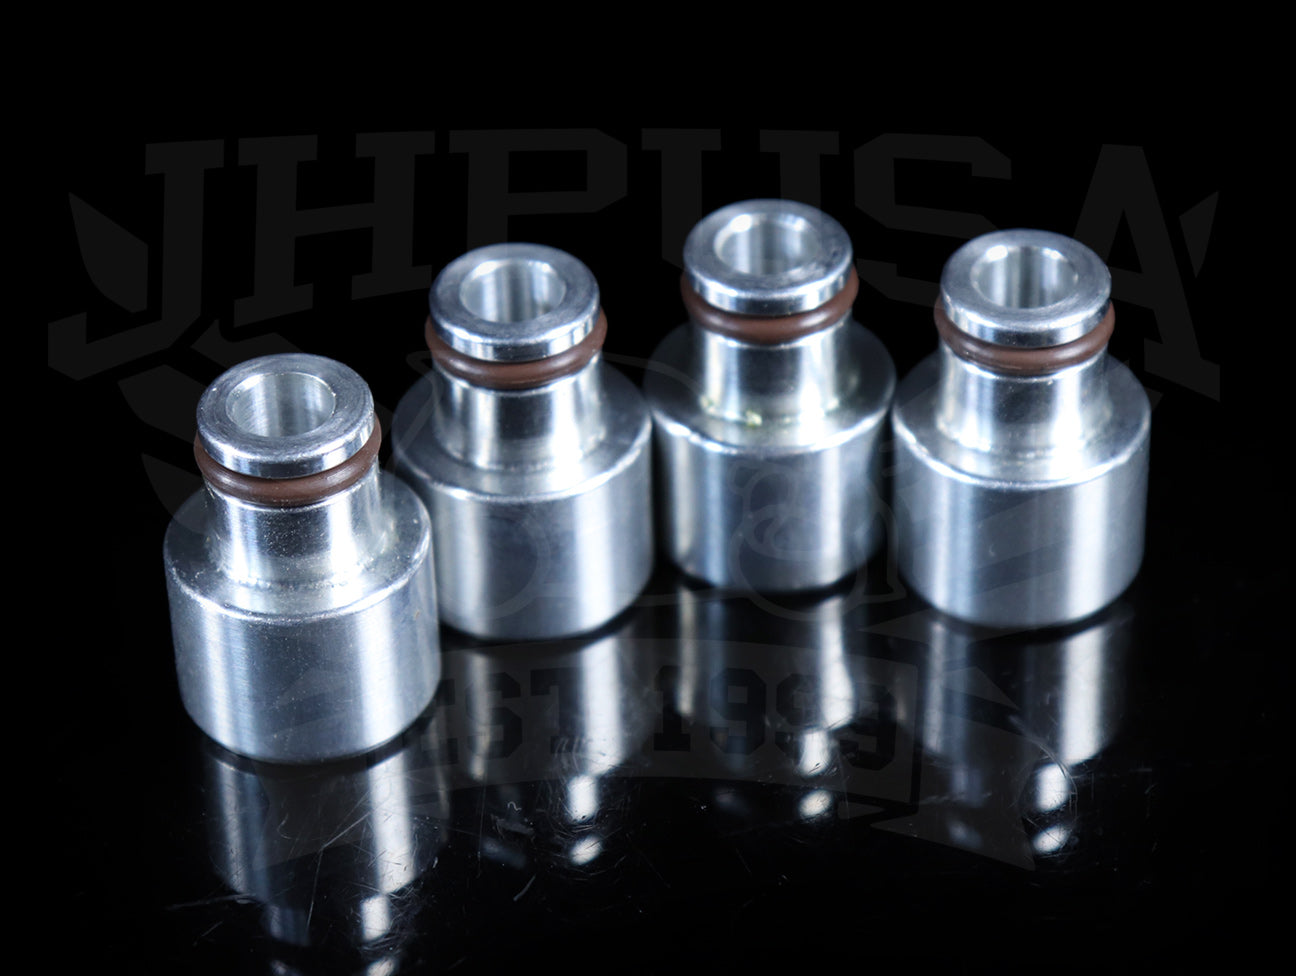 K-Tuned RDX Injector Hats for B/D-series Engines